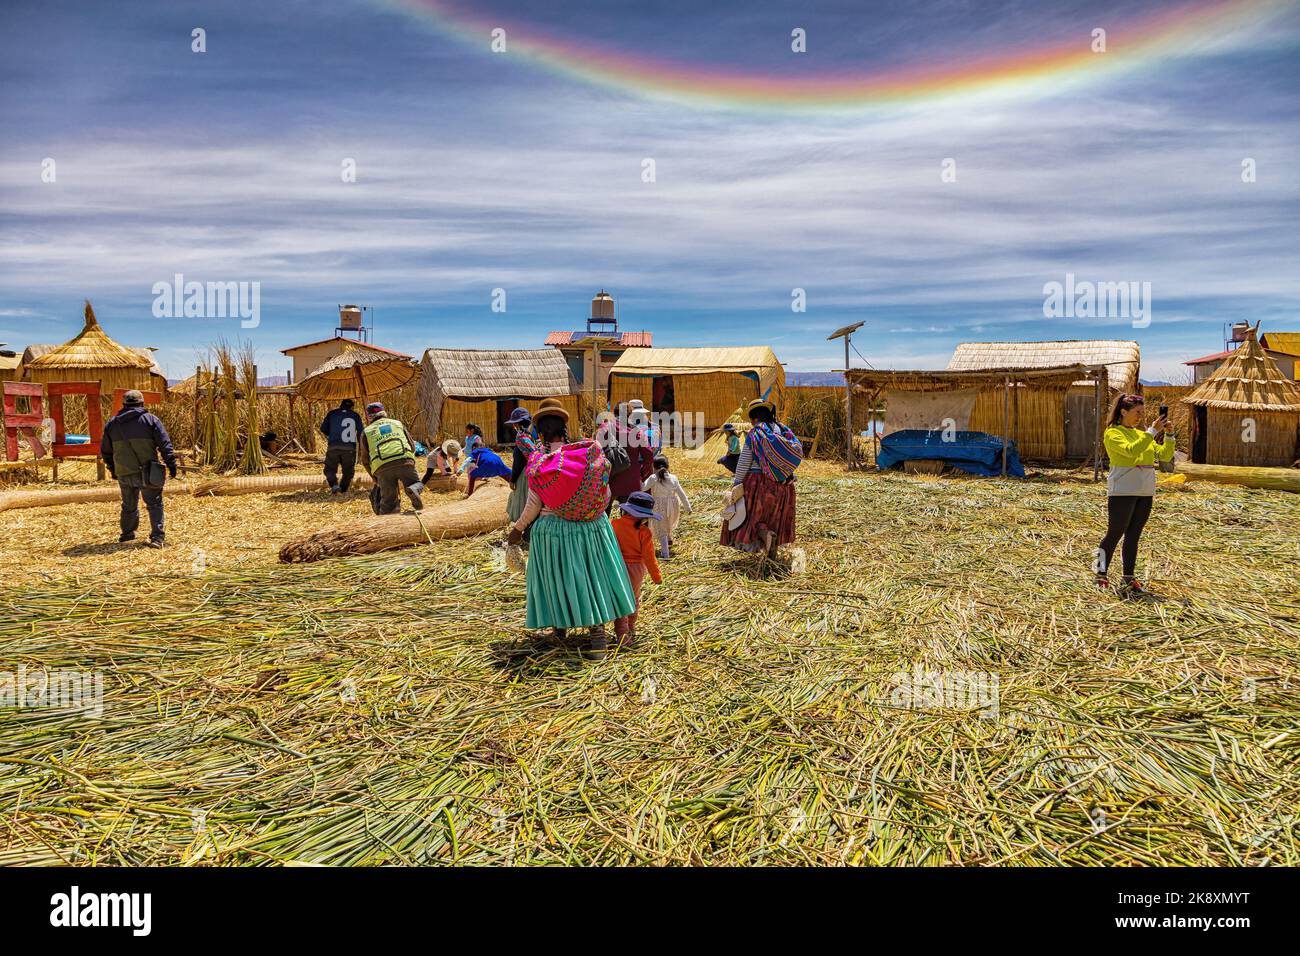 Puno,Peru - September 21, 2022: On a Uros floating straw island on Lake Titicaca with sun halo in the sky. Stock Photo